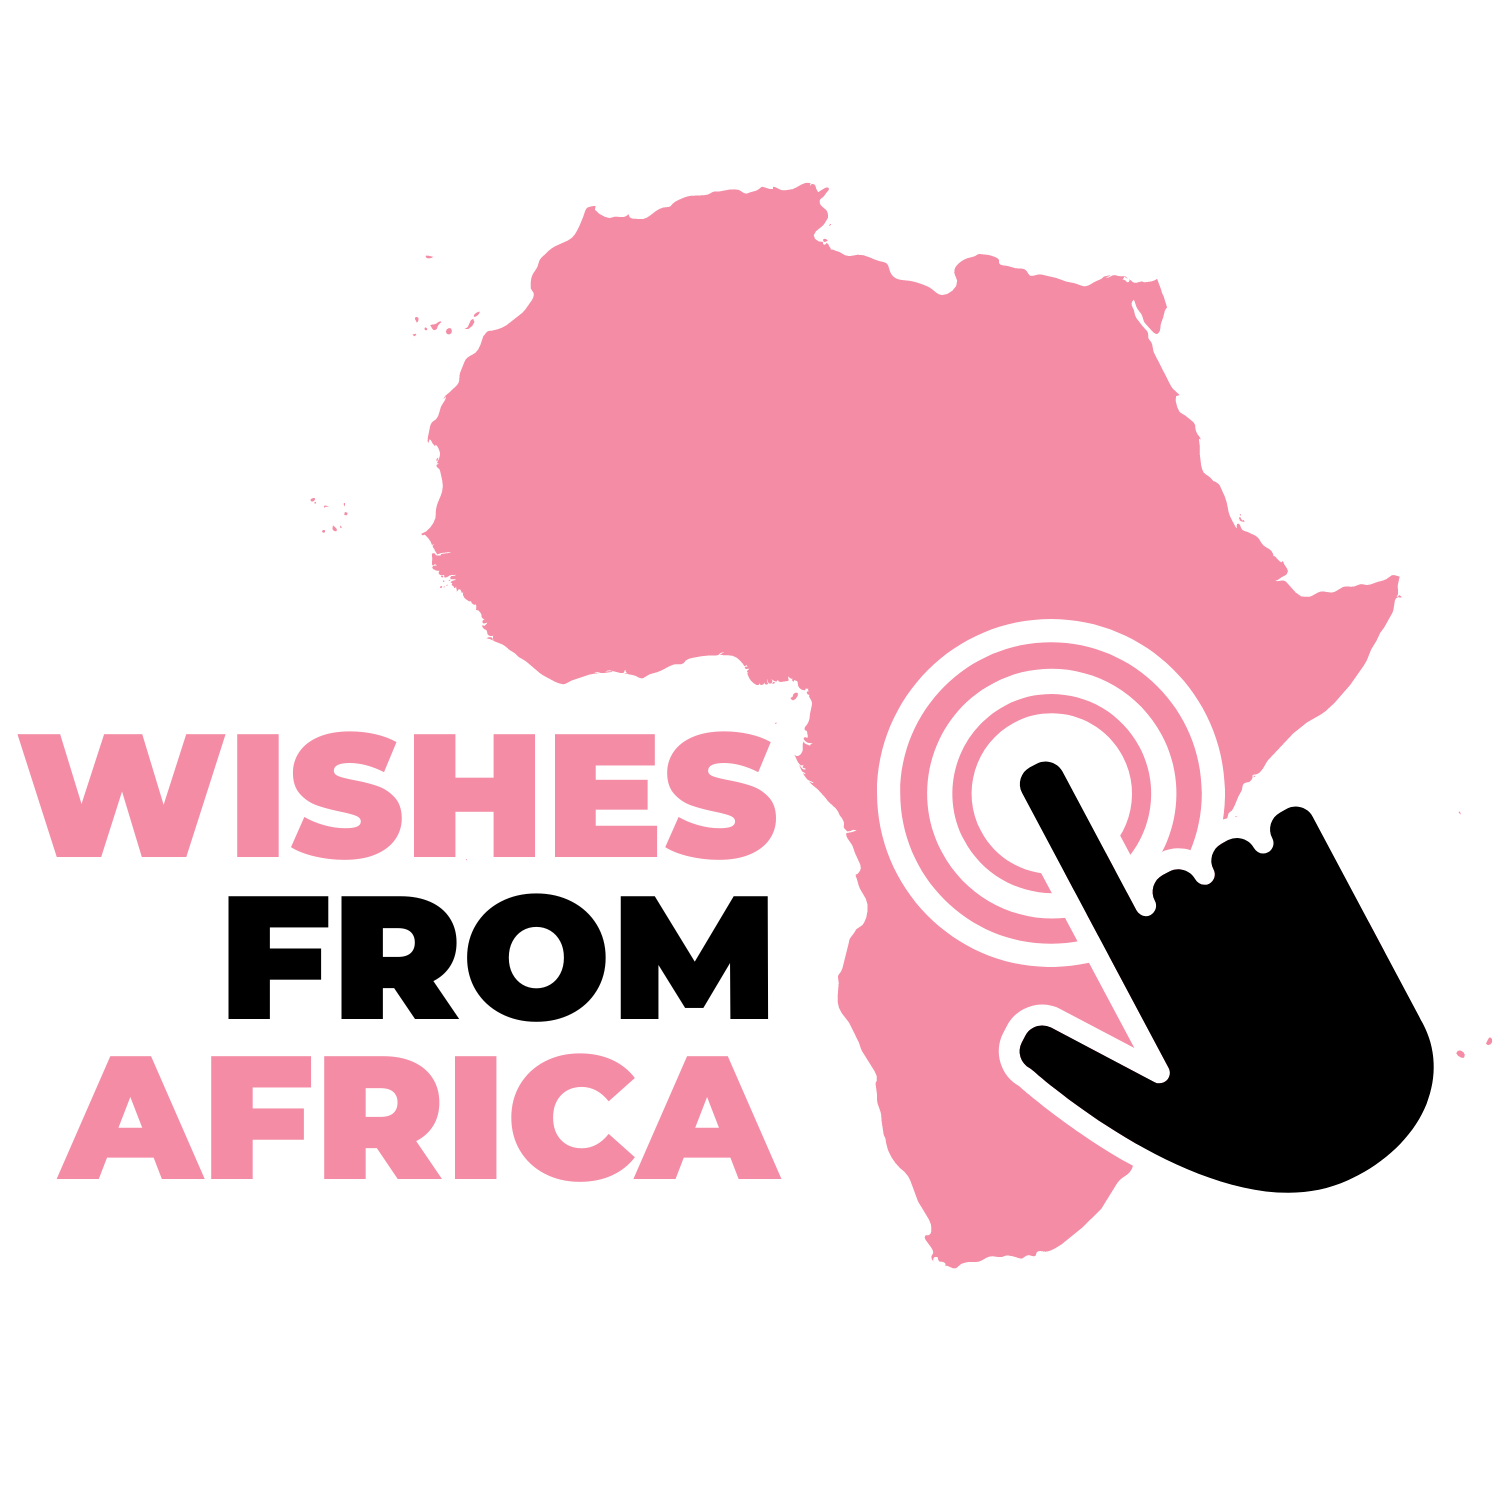 www.wishes-from-africa.com